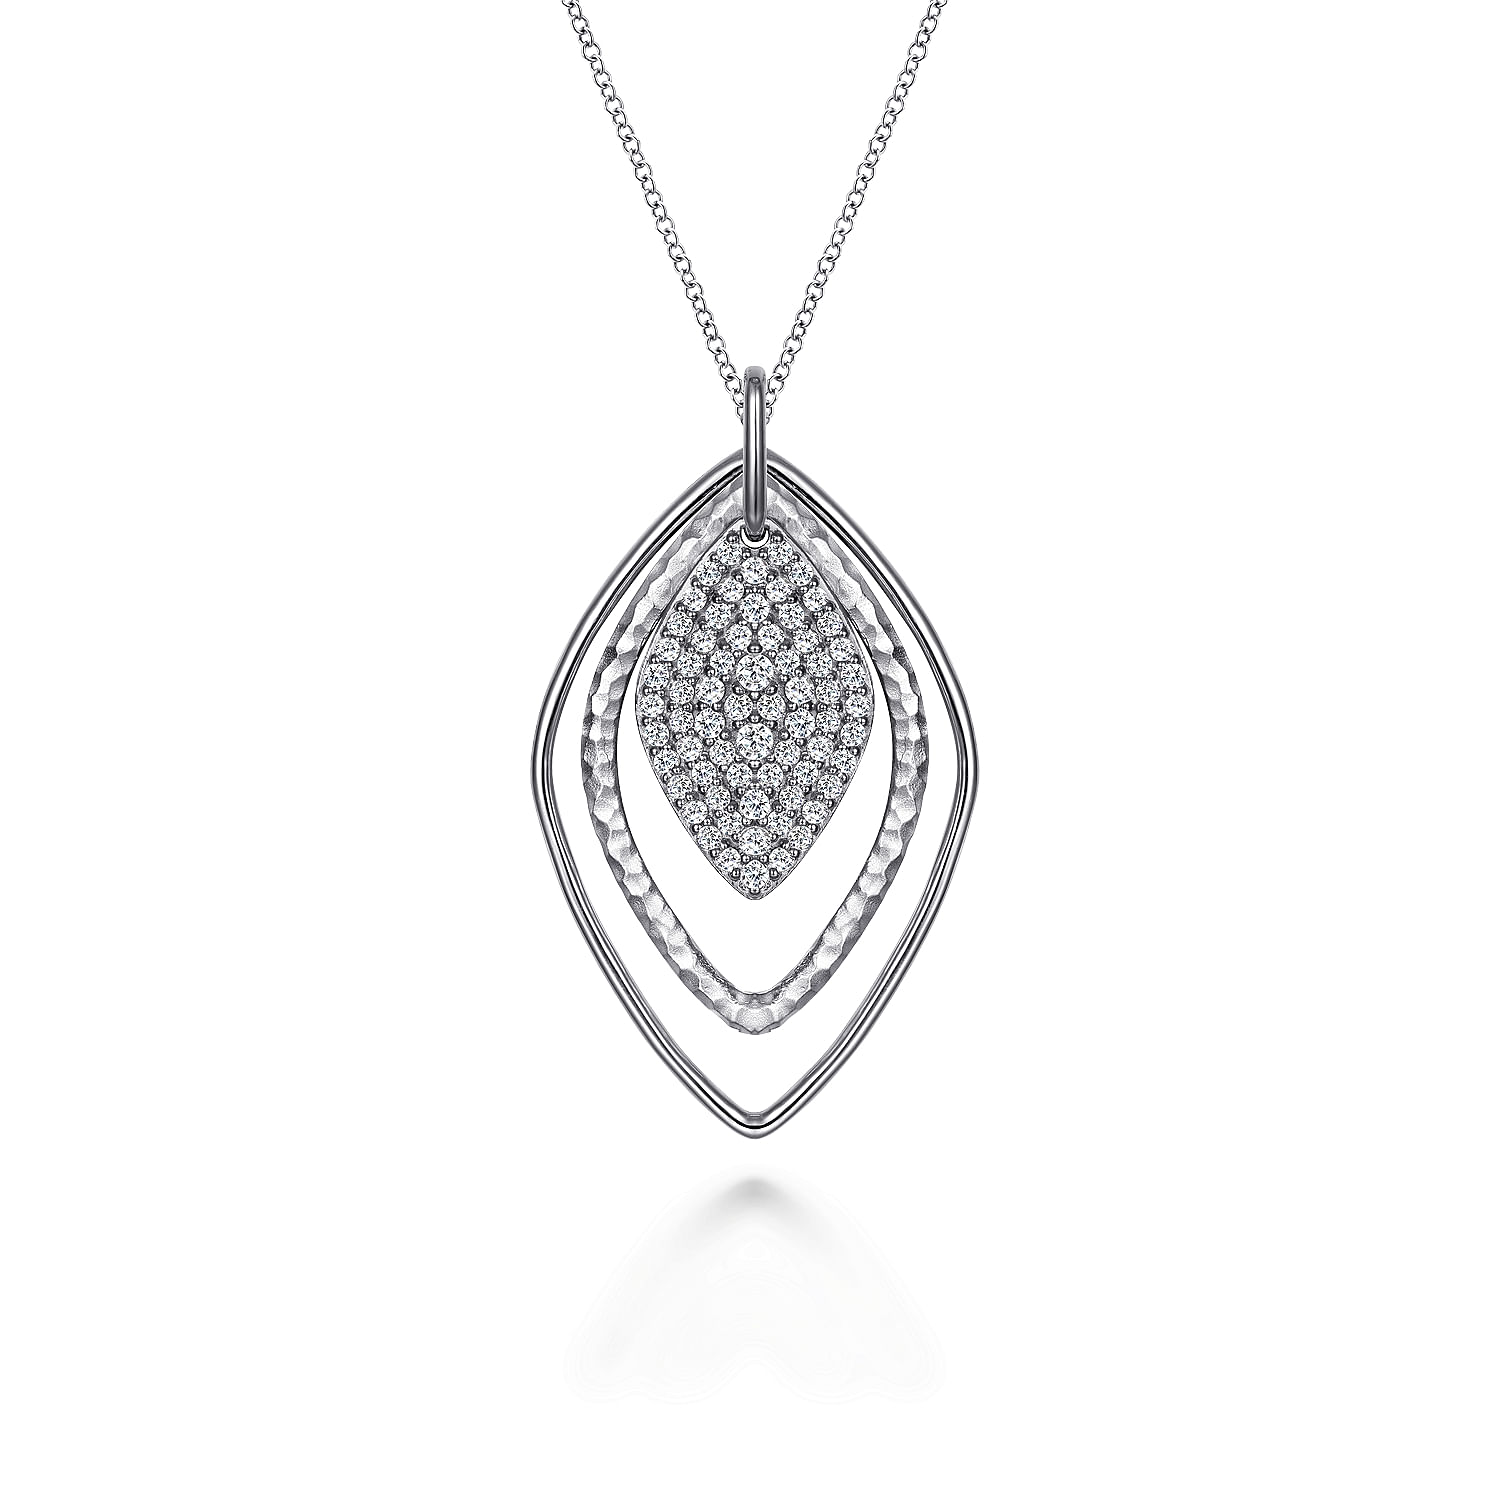 925 Sterling Silver Layered Rhombus Pendant Necklace with White Sapphire Pavé Drop